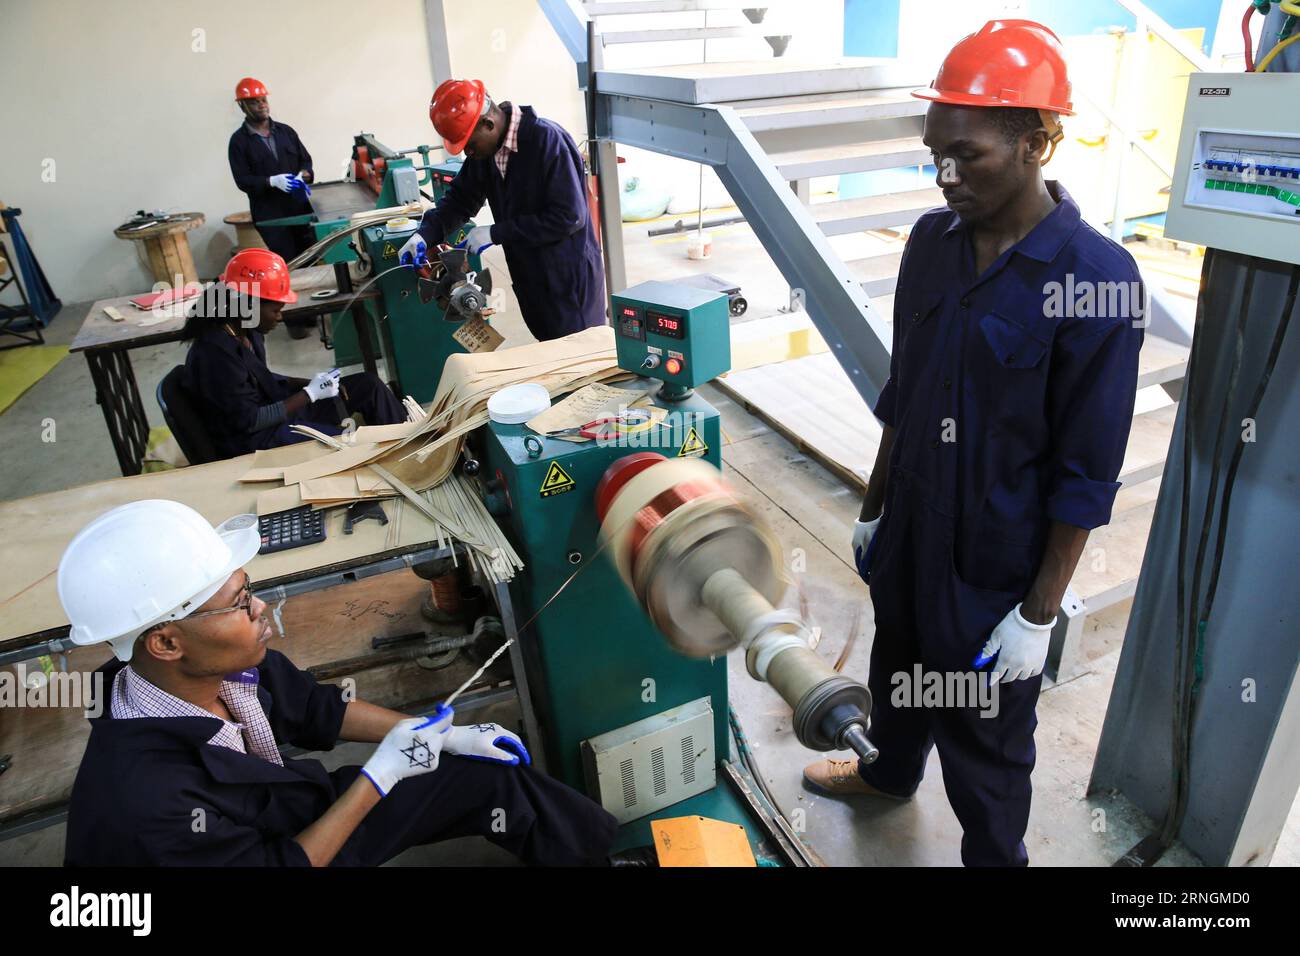 (161006) -- NAIROBI, Oct. 6, 2016 -- Kenyan technicians work at Yocean manufacturing transformers factory on the outskirts of Nairobi, Kenya, on Oct. 5, 2016. Kenya s first transfomer-manufacturing plant, set up by Chinese company Yocean Group, opened on Wednesday. Kenya has been relying on transformers from abroad, mostly from India. Kenya s Cabinet Secretary for Energy and Petroleum, Charles Keter, said the plant will ease procurement of transformers and other electrical appliances. ) (dtf) KENYA-NAIROBI-ENERGY-CHINA-TRANSFORMER PanxSiwei PUBLICATIONxNOTxINxCHN   Nairobi OCT 6 2016 Kenyan Te Stock Photo